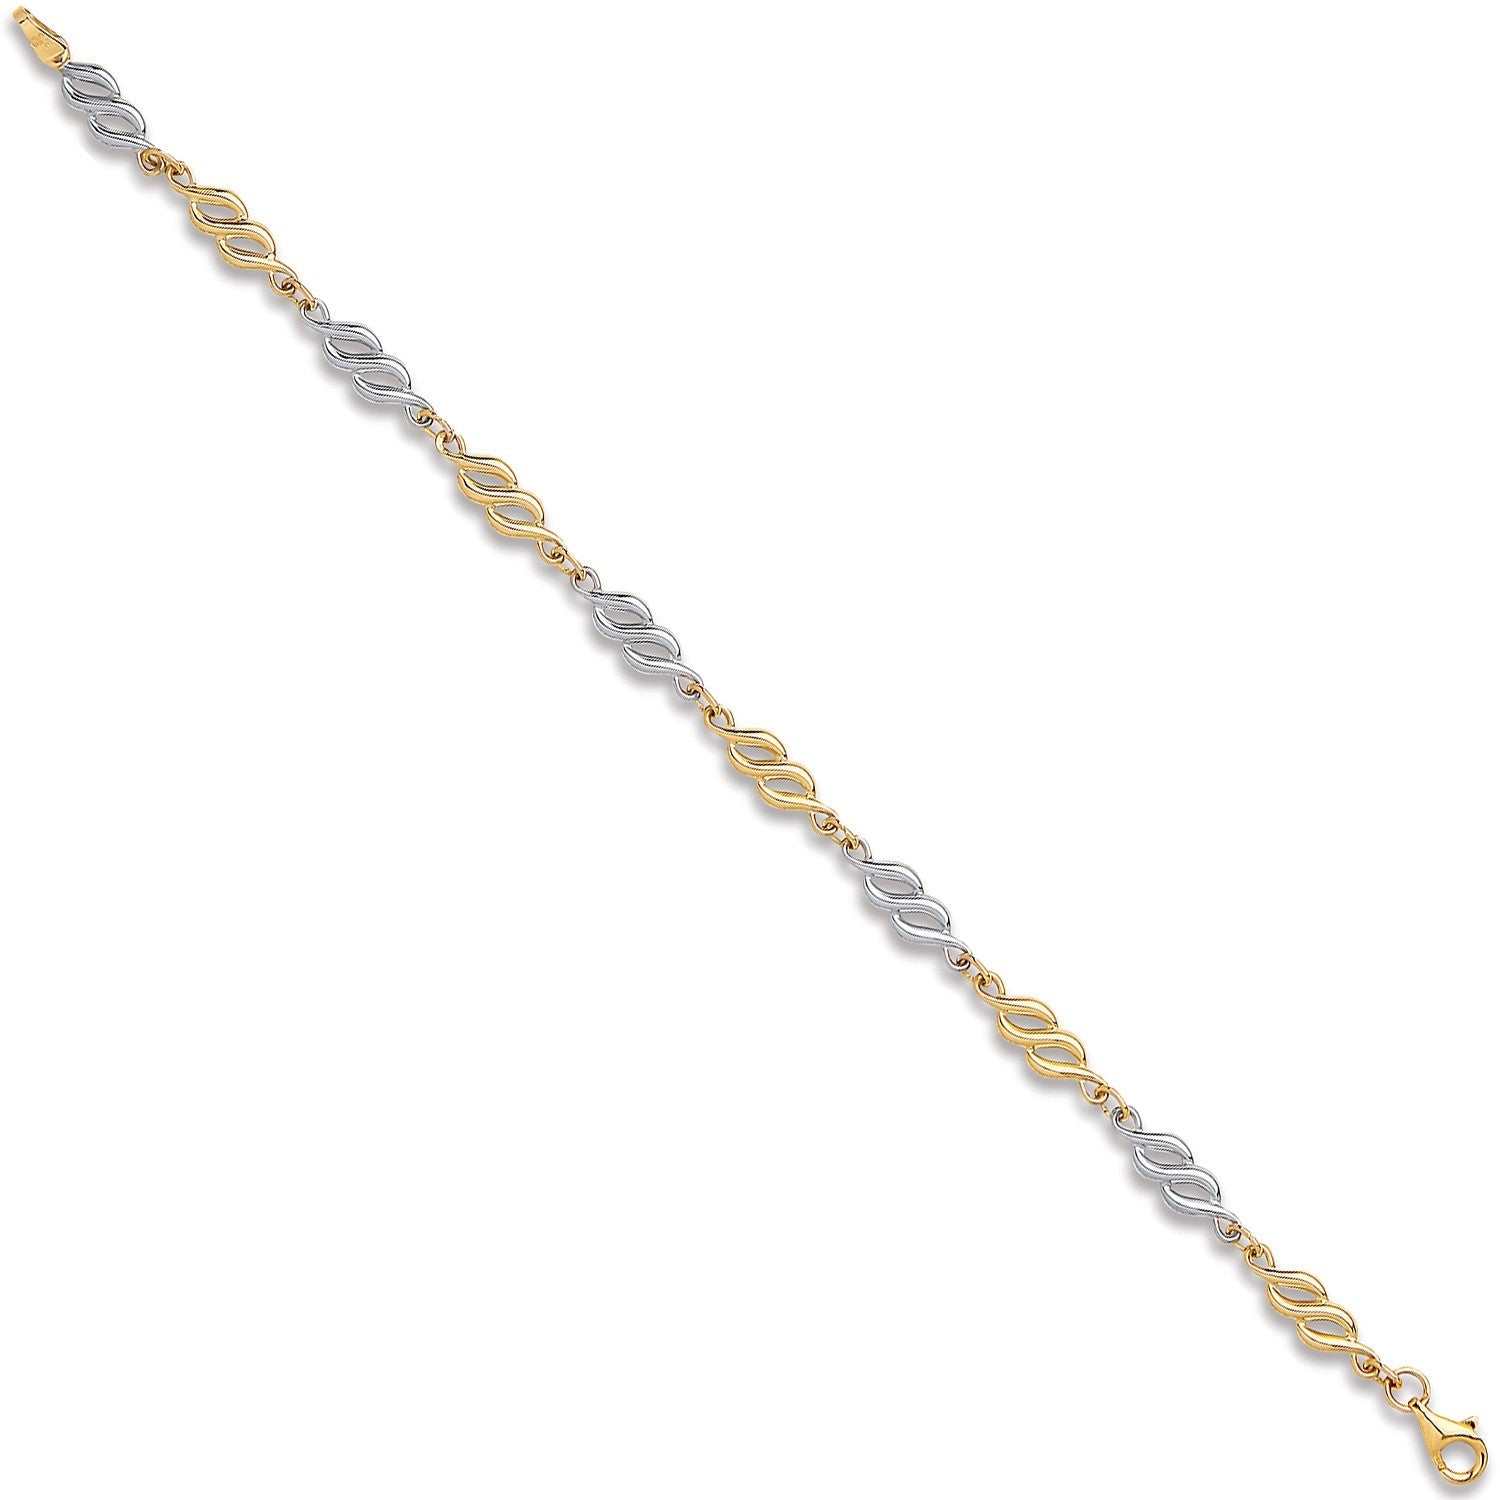 9ct Yellow And White Gold Fancy Hollow Link Bracelet - FJewellery